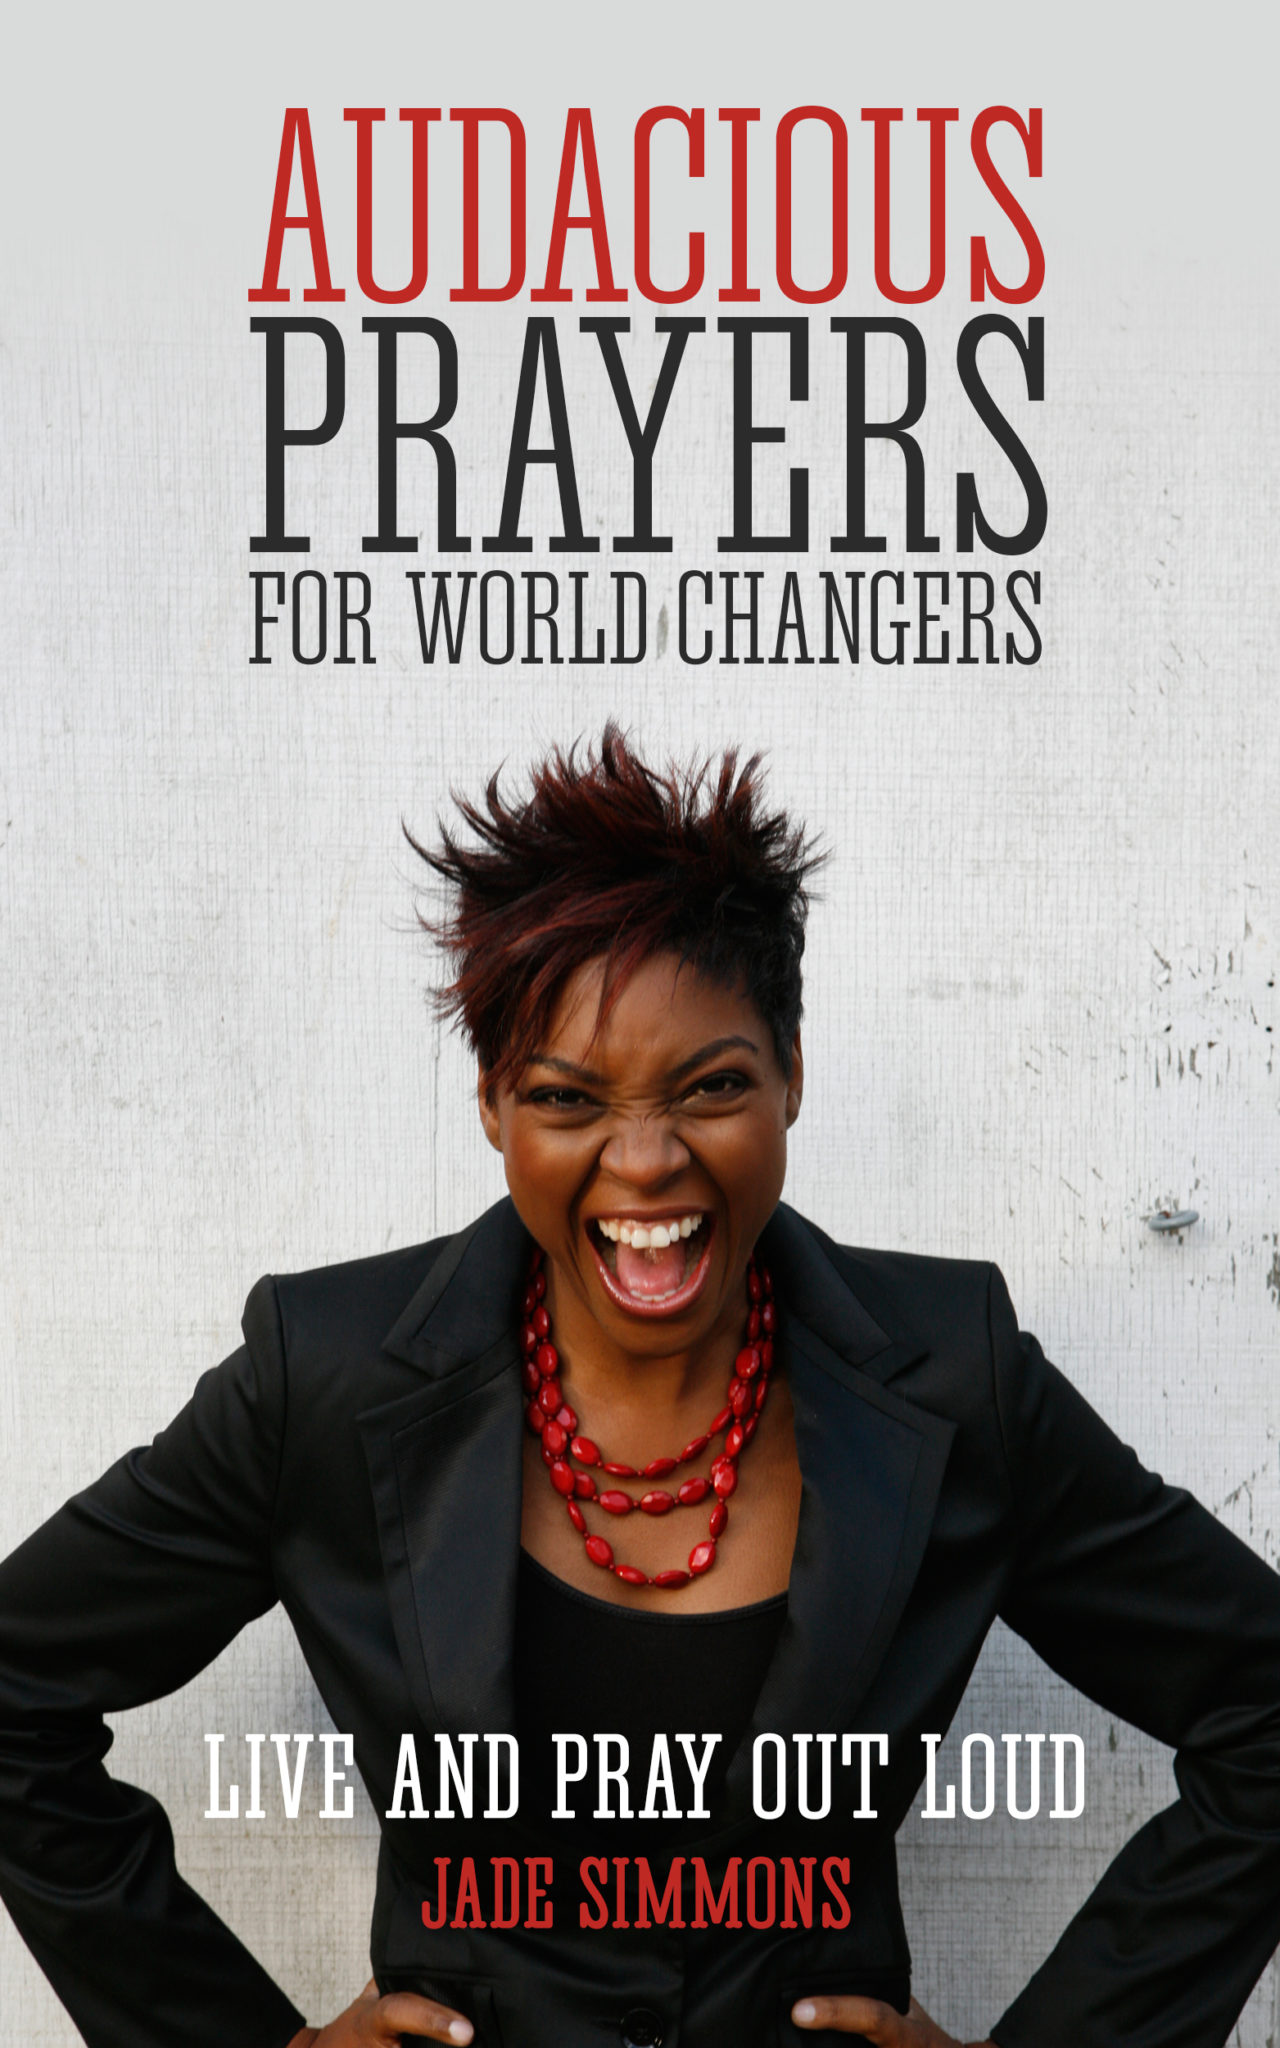 Audacious prayers final cover copy audacious prayers for world changers: live and pray out loud